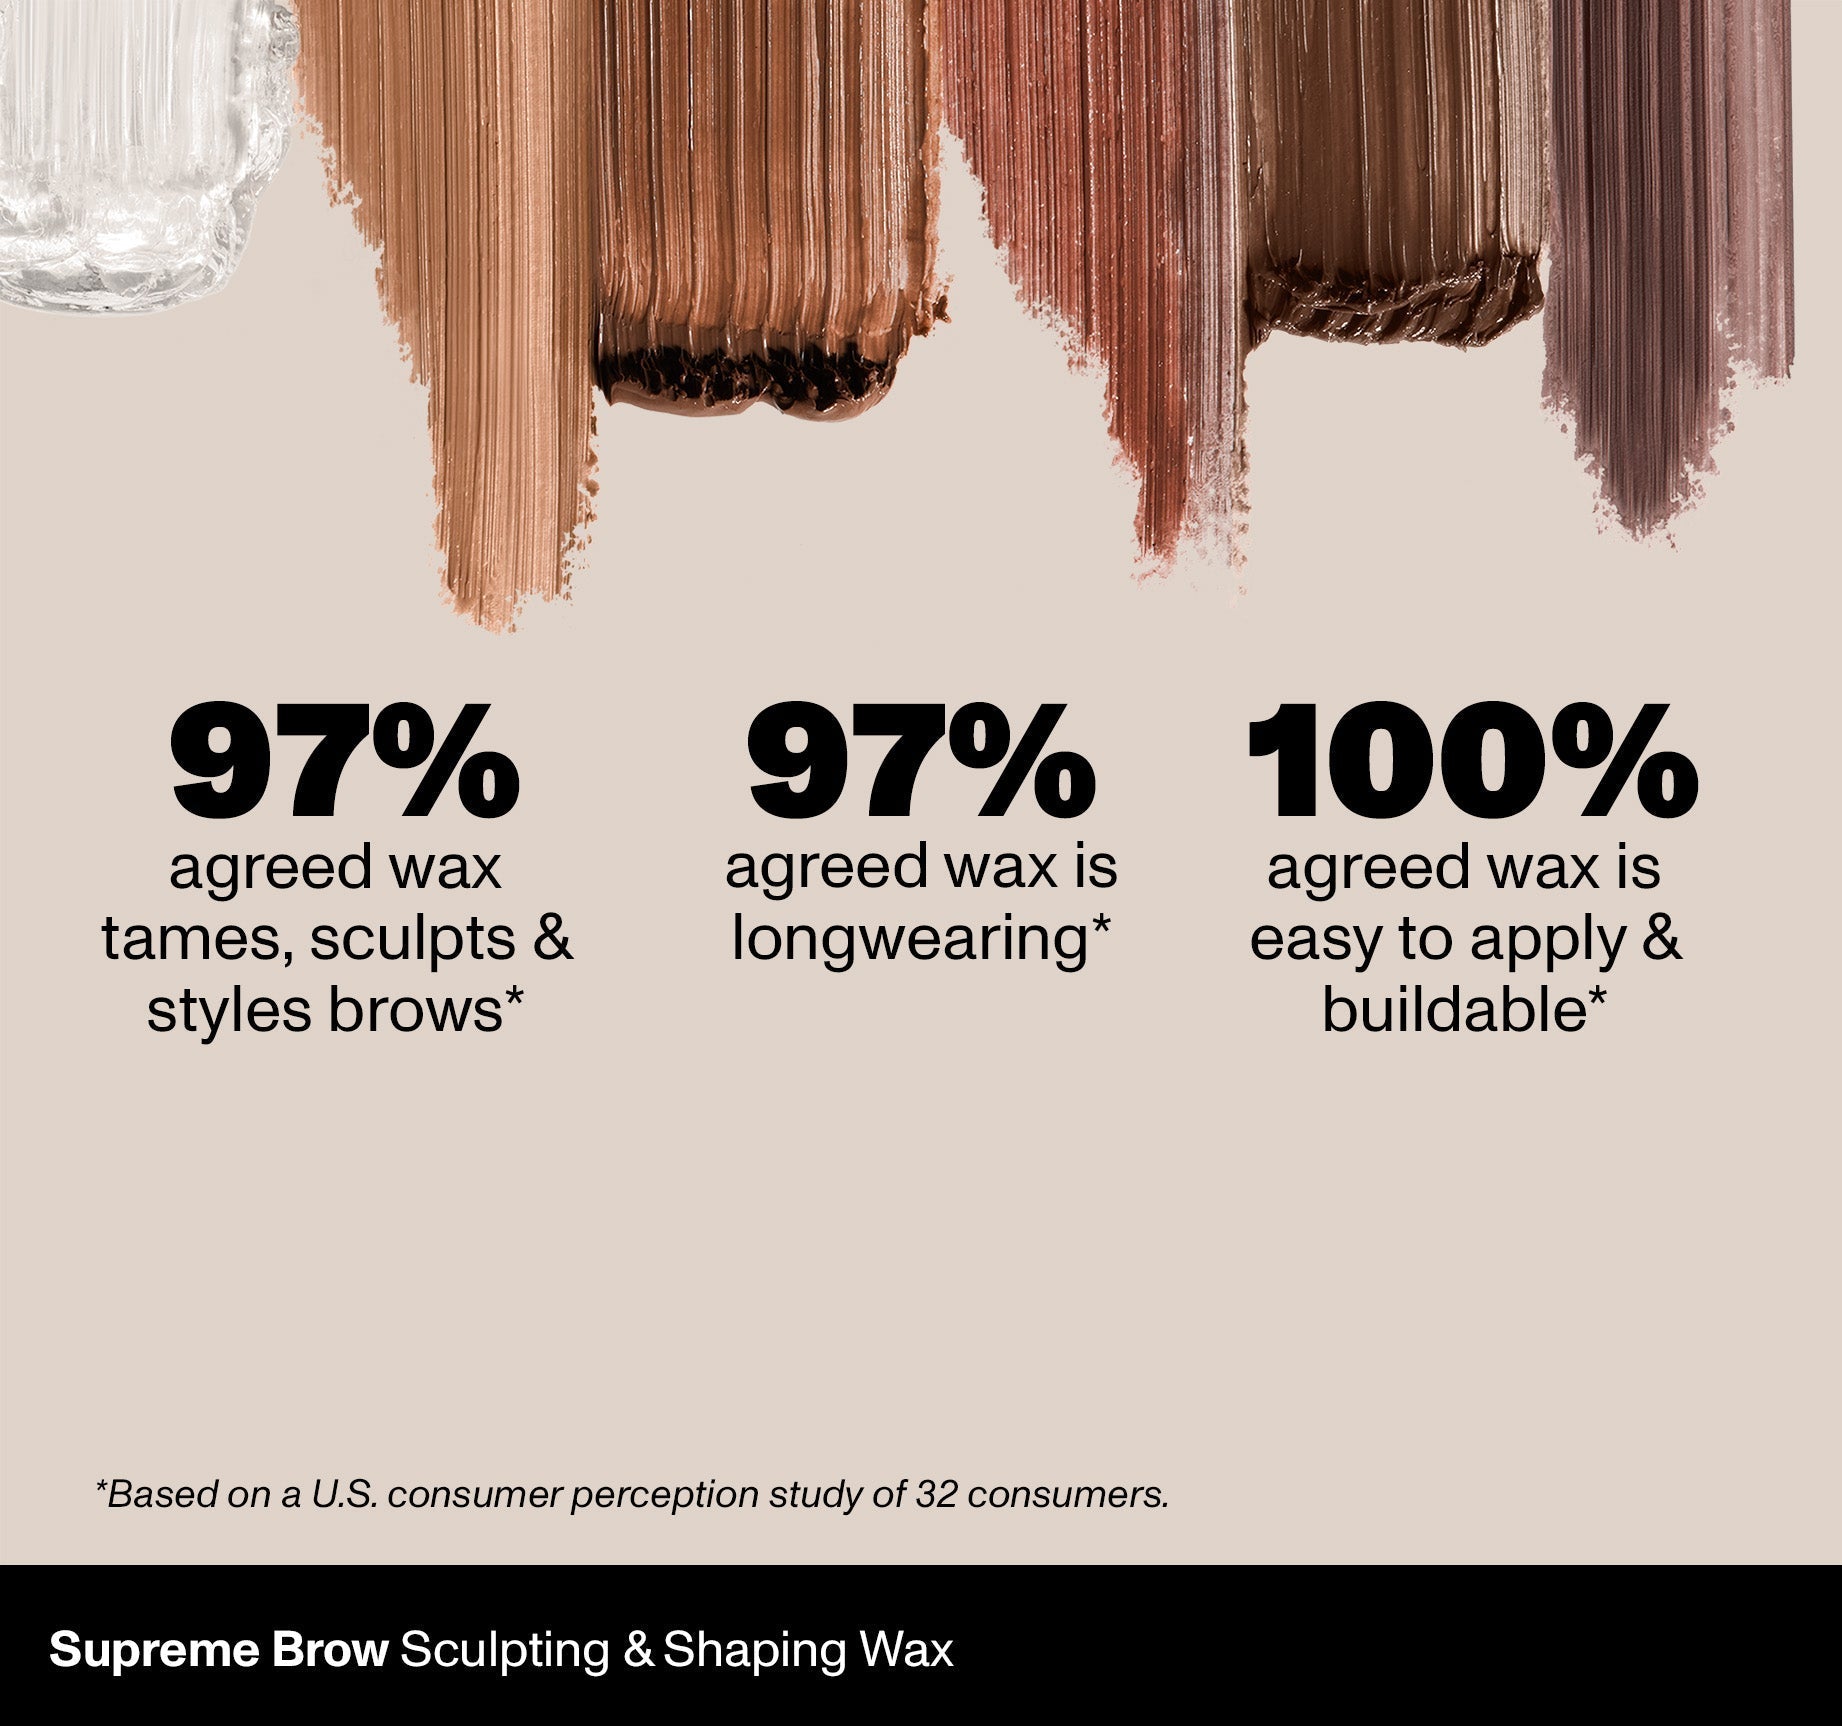 Supreme Brow Sculpting And Shaping Wax - Latte - Image 5